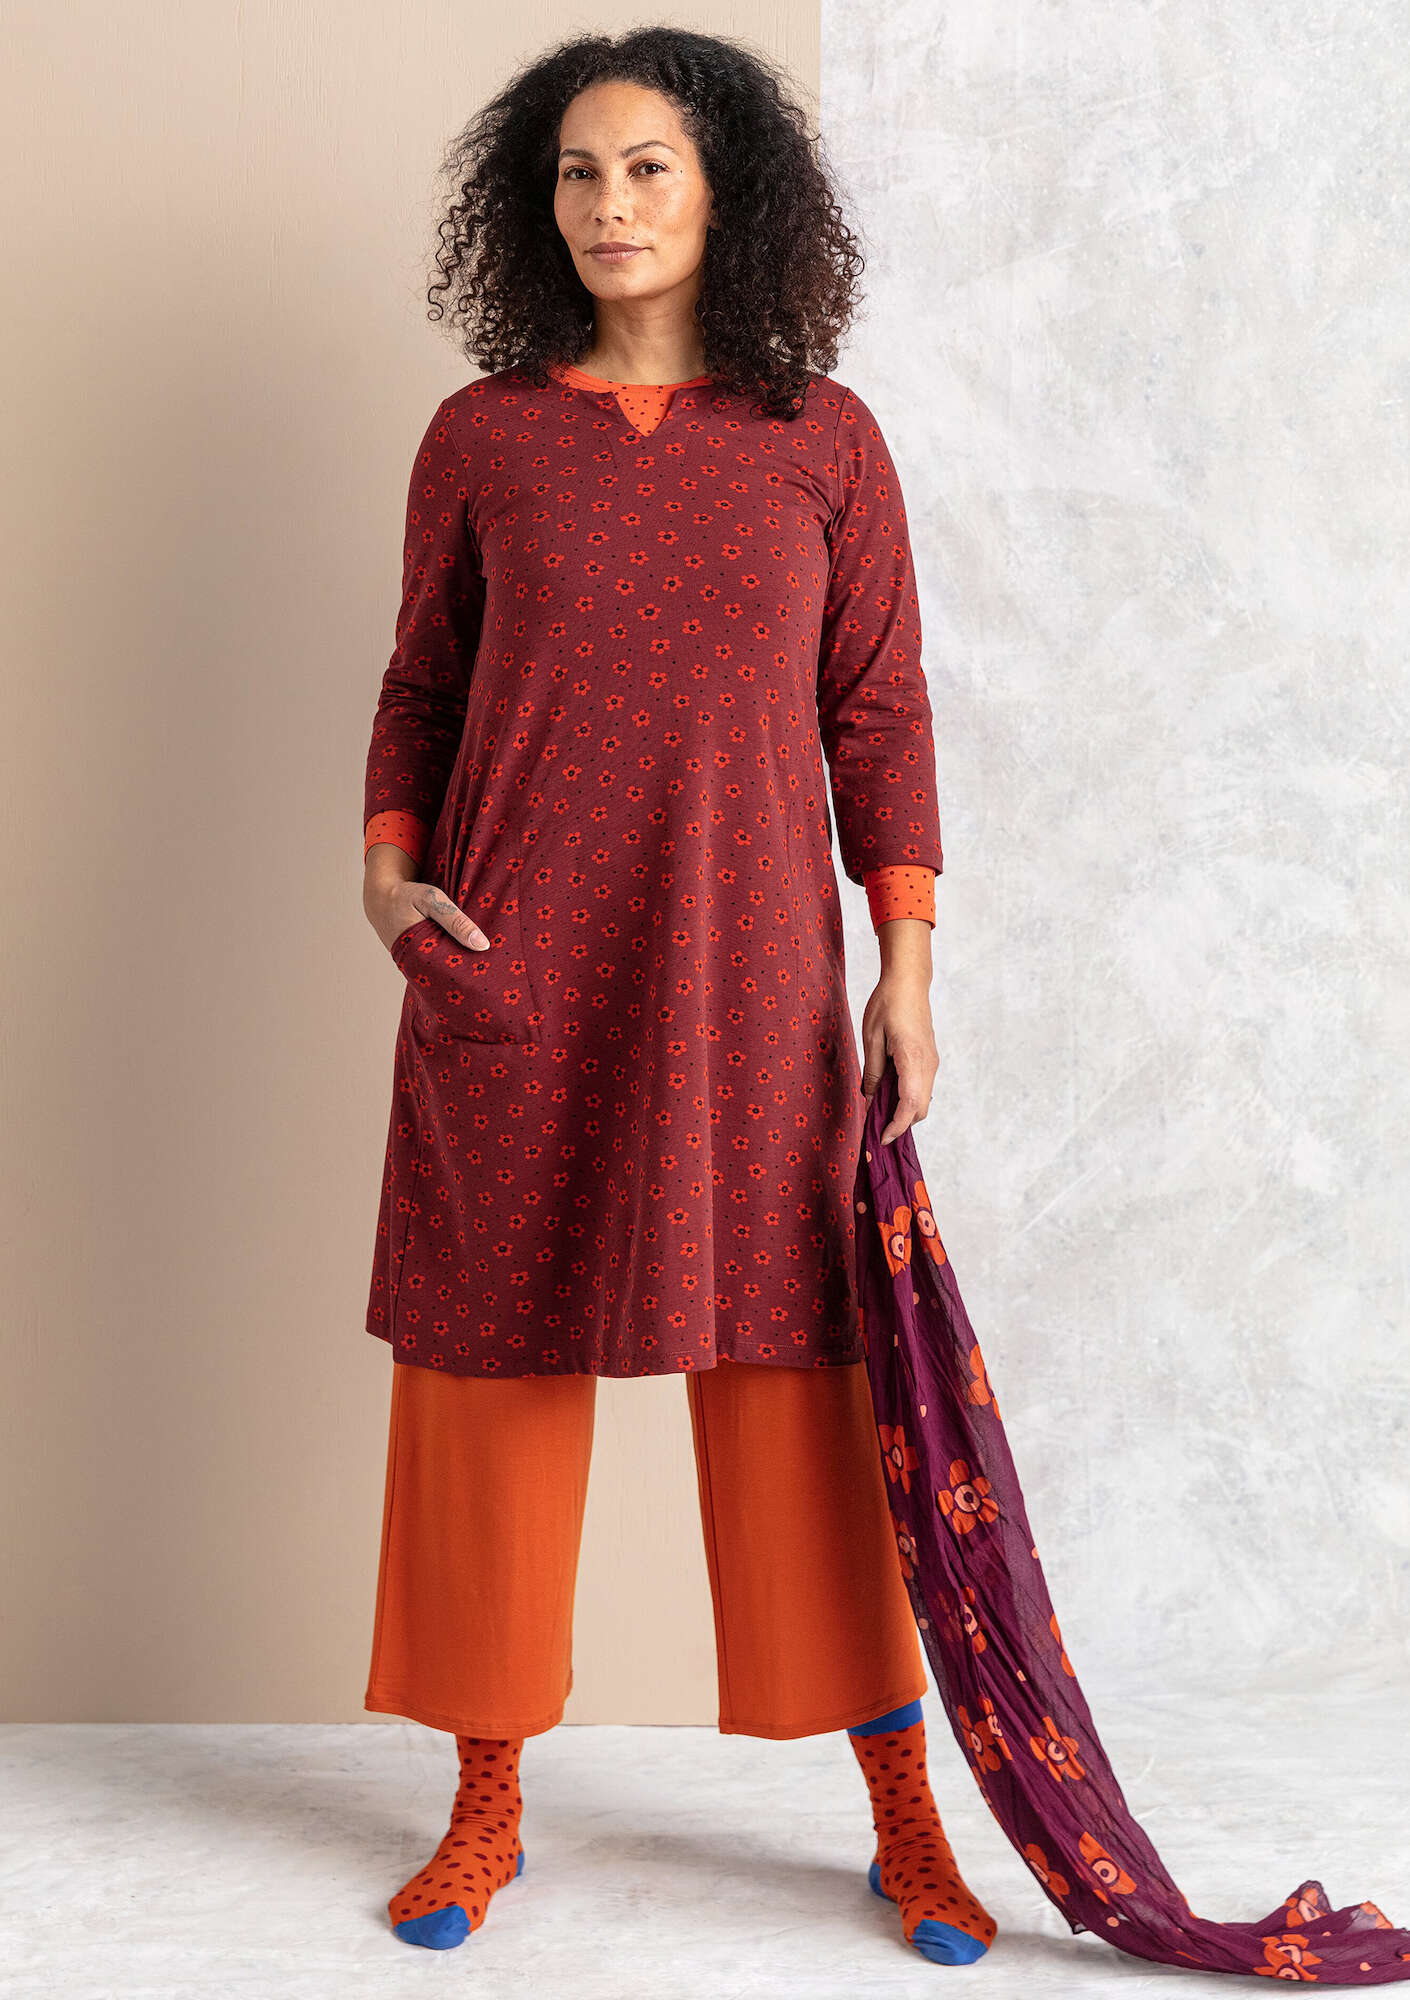 “Belle” organic cotton/elastane jersey dress agate red/patterned